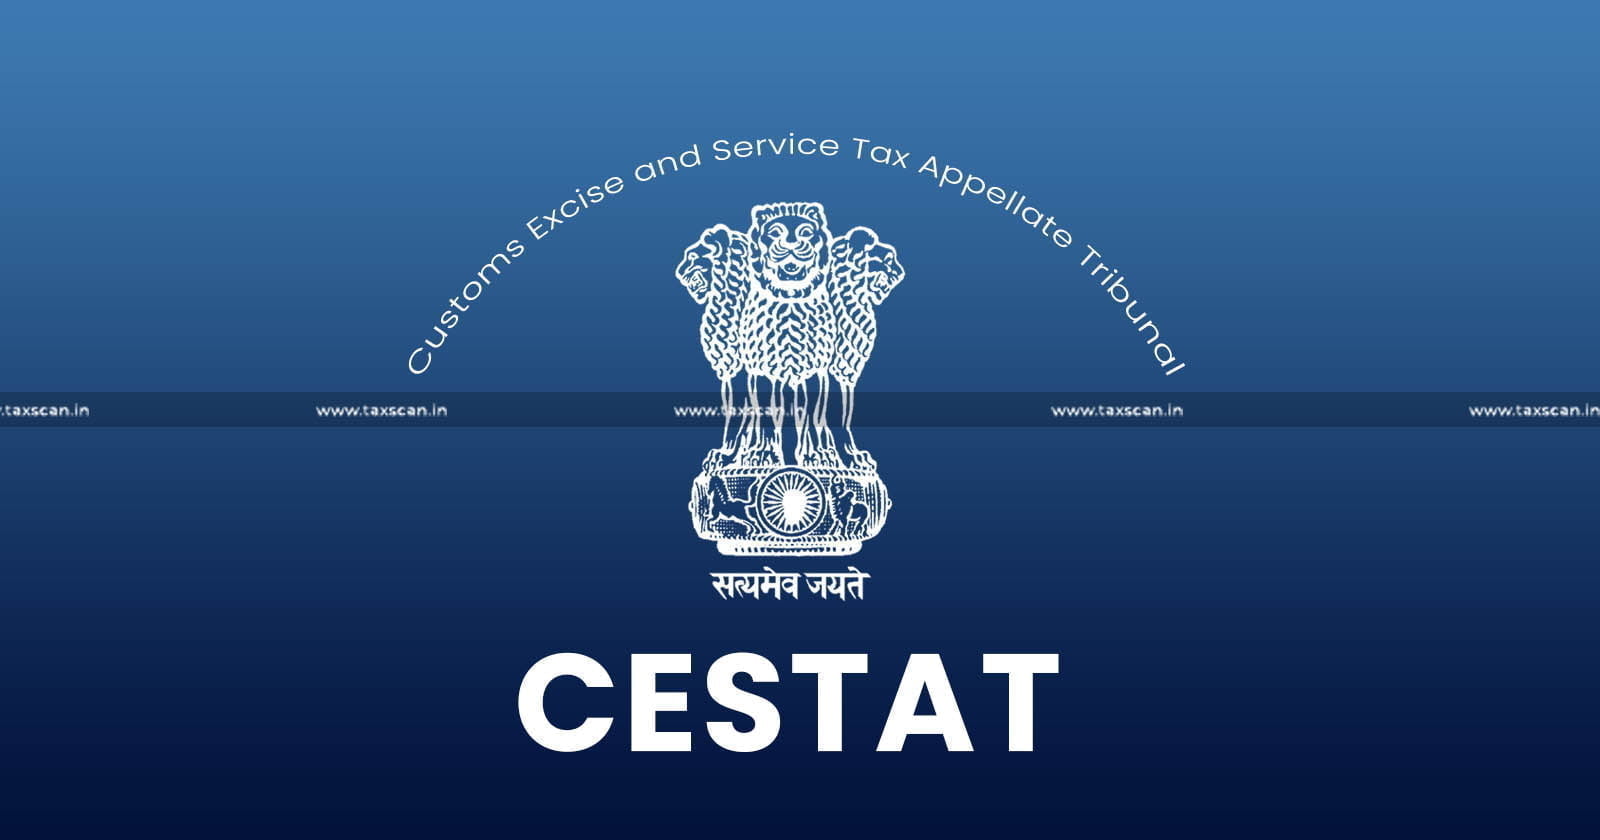 Cestat - Weekly Round UP - Service Tax- Customs - Excise - taxscan